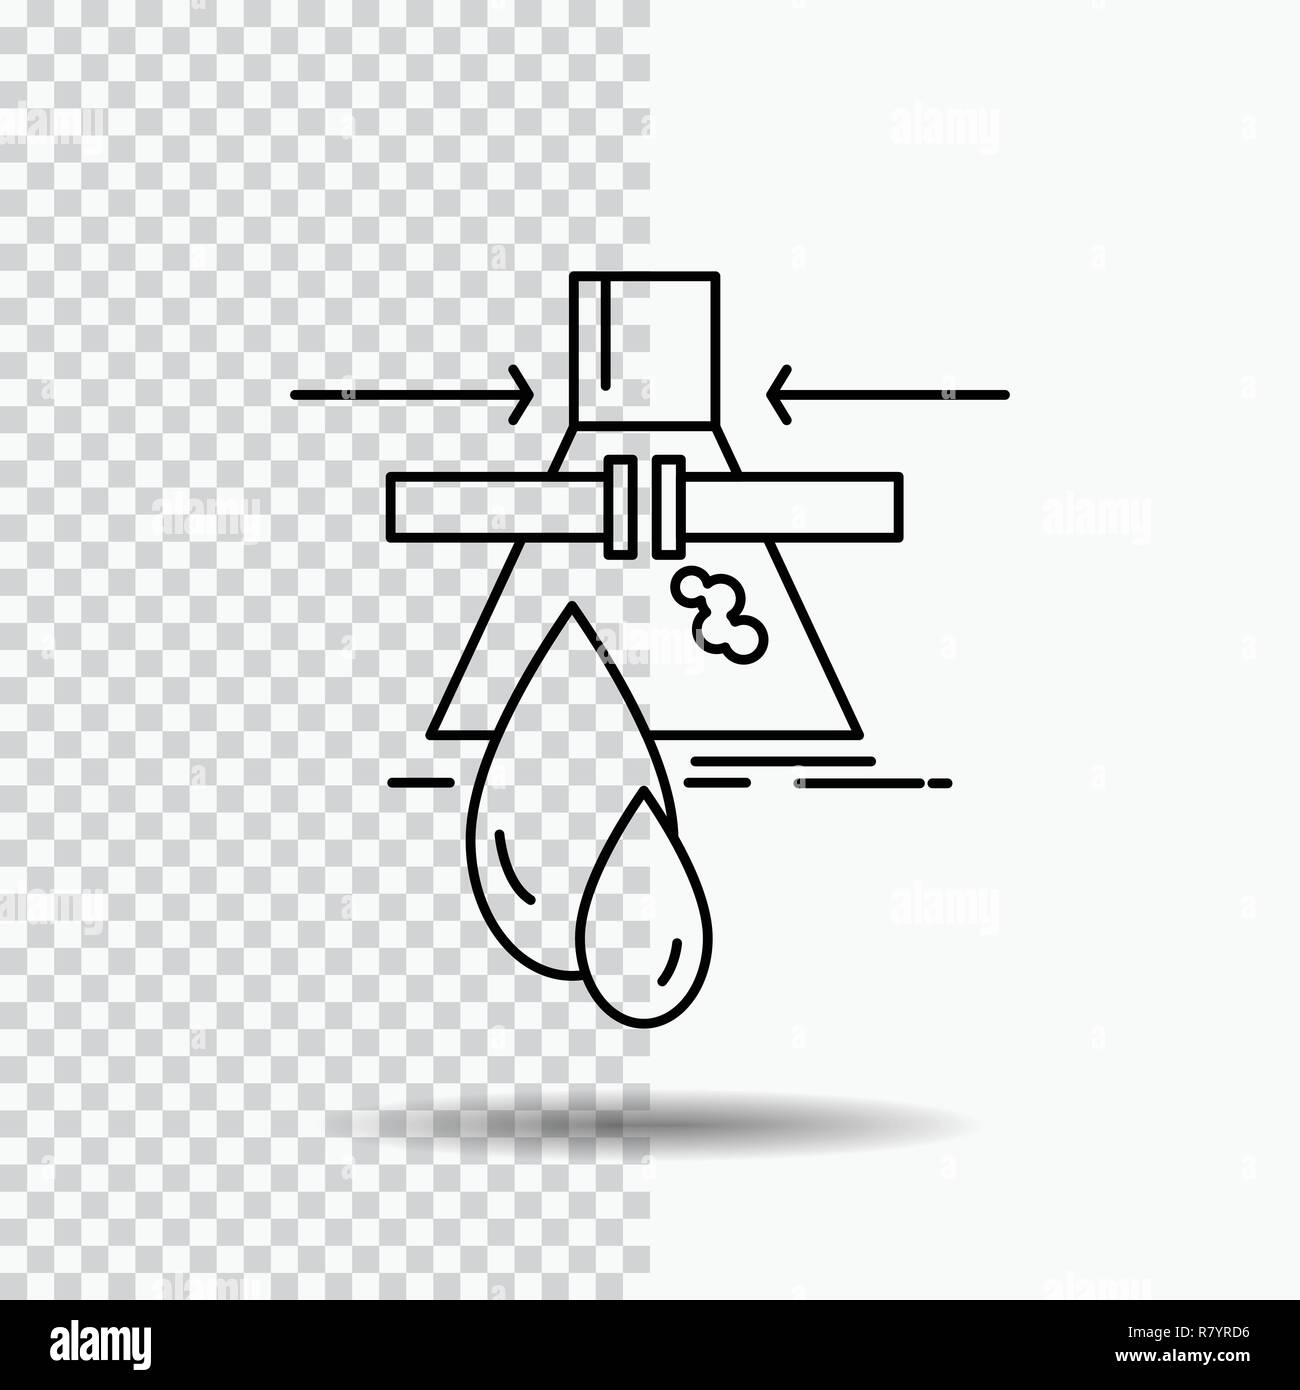 Chemical, Leak, Detection, Factory, pollution Line Icon on Transparent Background. Black Icon Vector Illustration Stock Vector